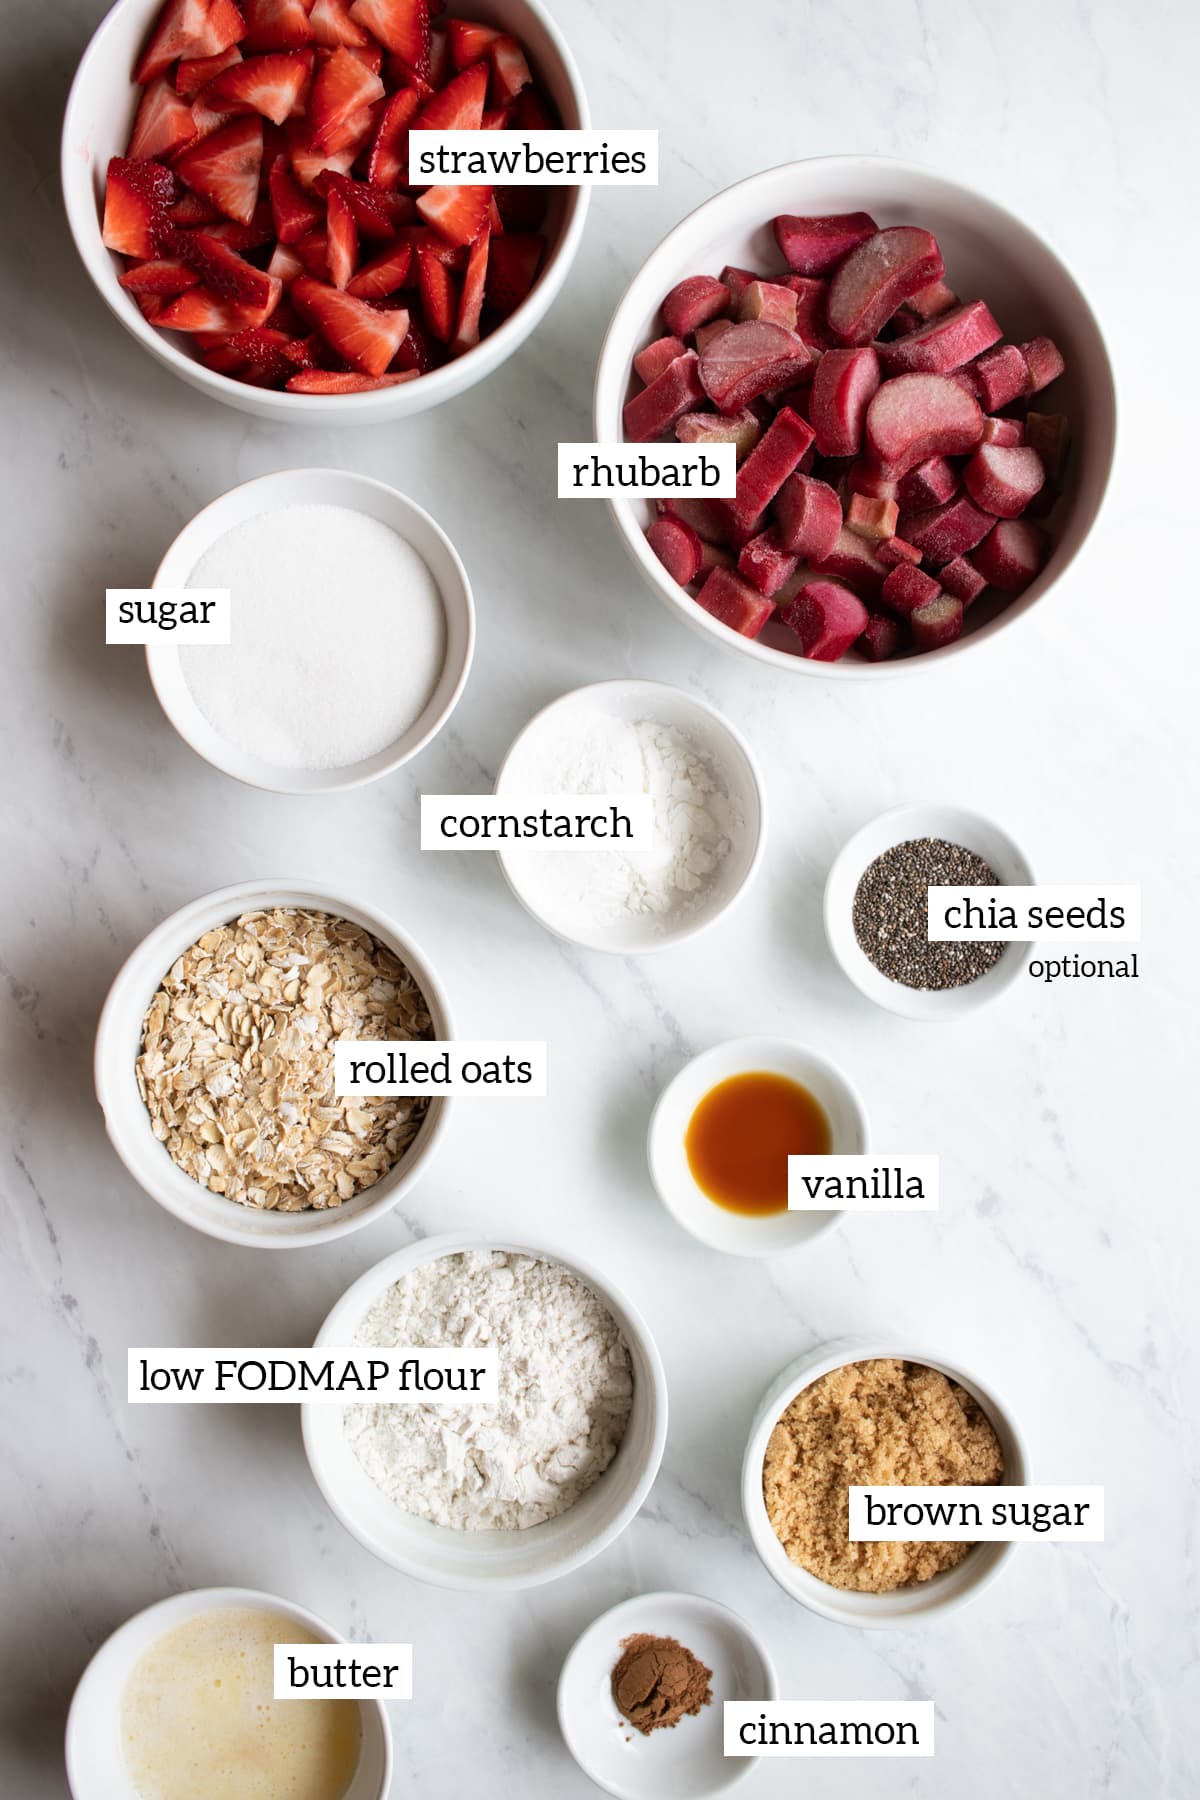 Ingredients needed to make this strawberry-rhubarb crisp are measured into small white bowls. 